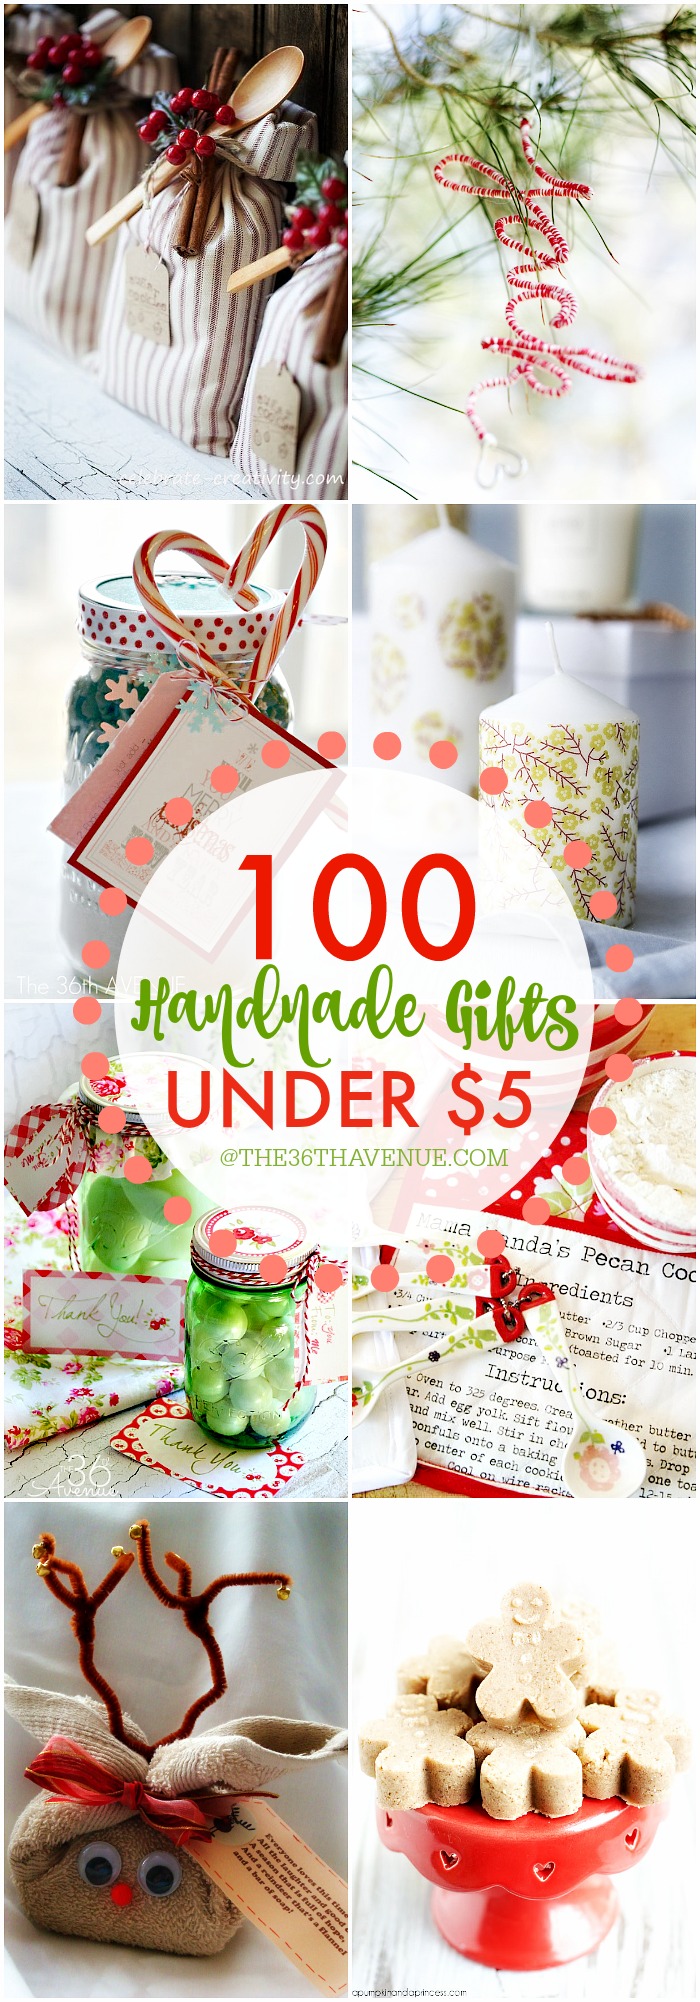 30 best gifts under $5 - Unique and cheap gift ideas